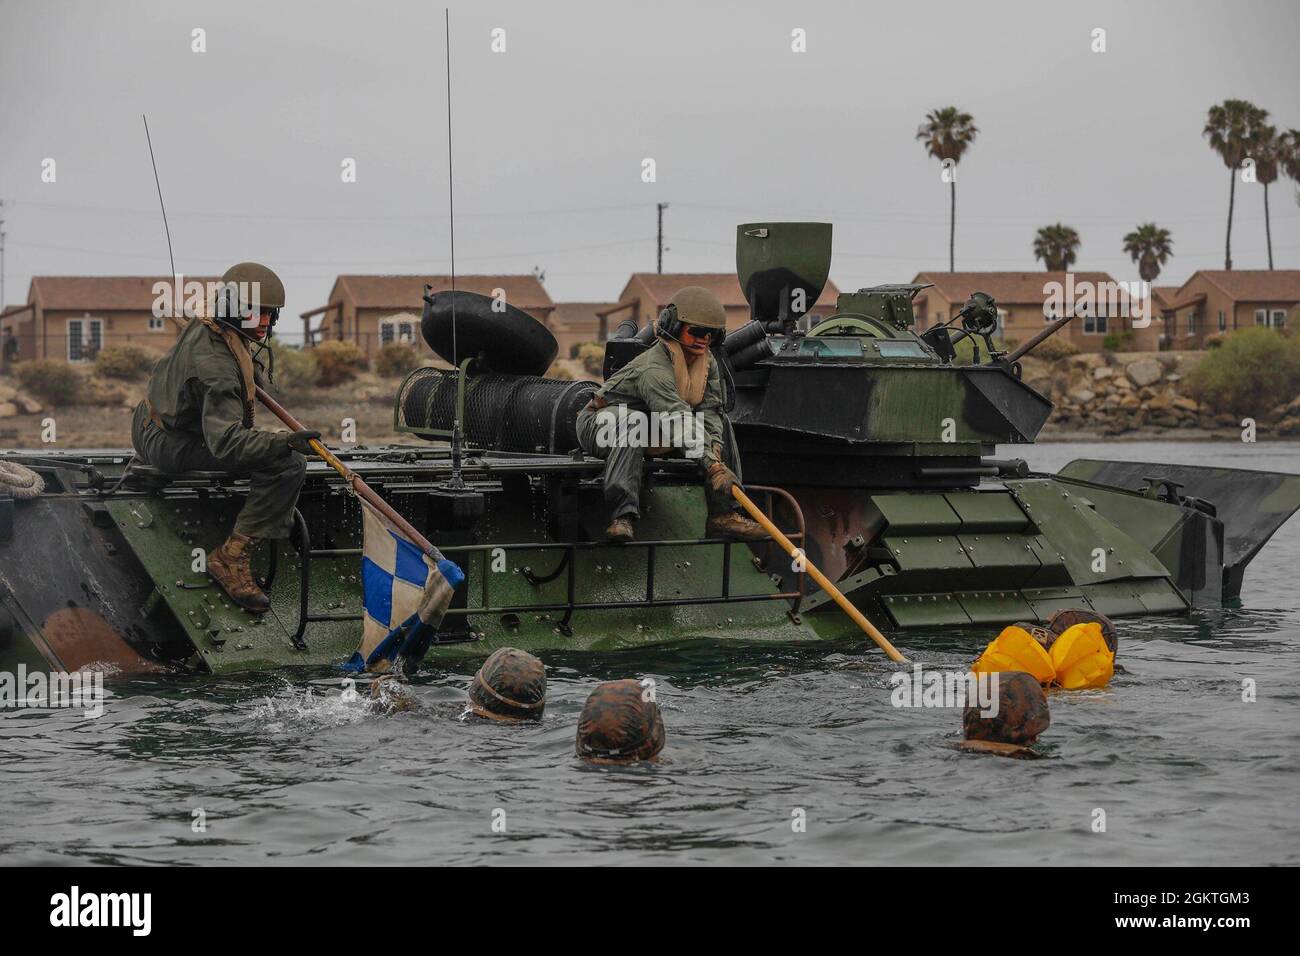 U.S. Marines with Co. A, 1st Battalion, 5th Marine Regiment, 1st Marine Division (1st MARDIV) and Co. B, 3d Assault Amphibian Battalion, 1st MARDIV, conduct rough water drills during AAV-P7/A1 amphibious assault vehicle training at Marine Corps Base Camp Pendleton, California, June 29, 2021. The training was conducted to ensure Marines are proficient with safety procedures for water Stock Photo